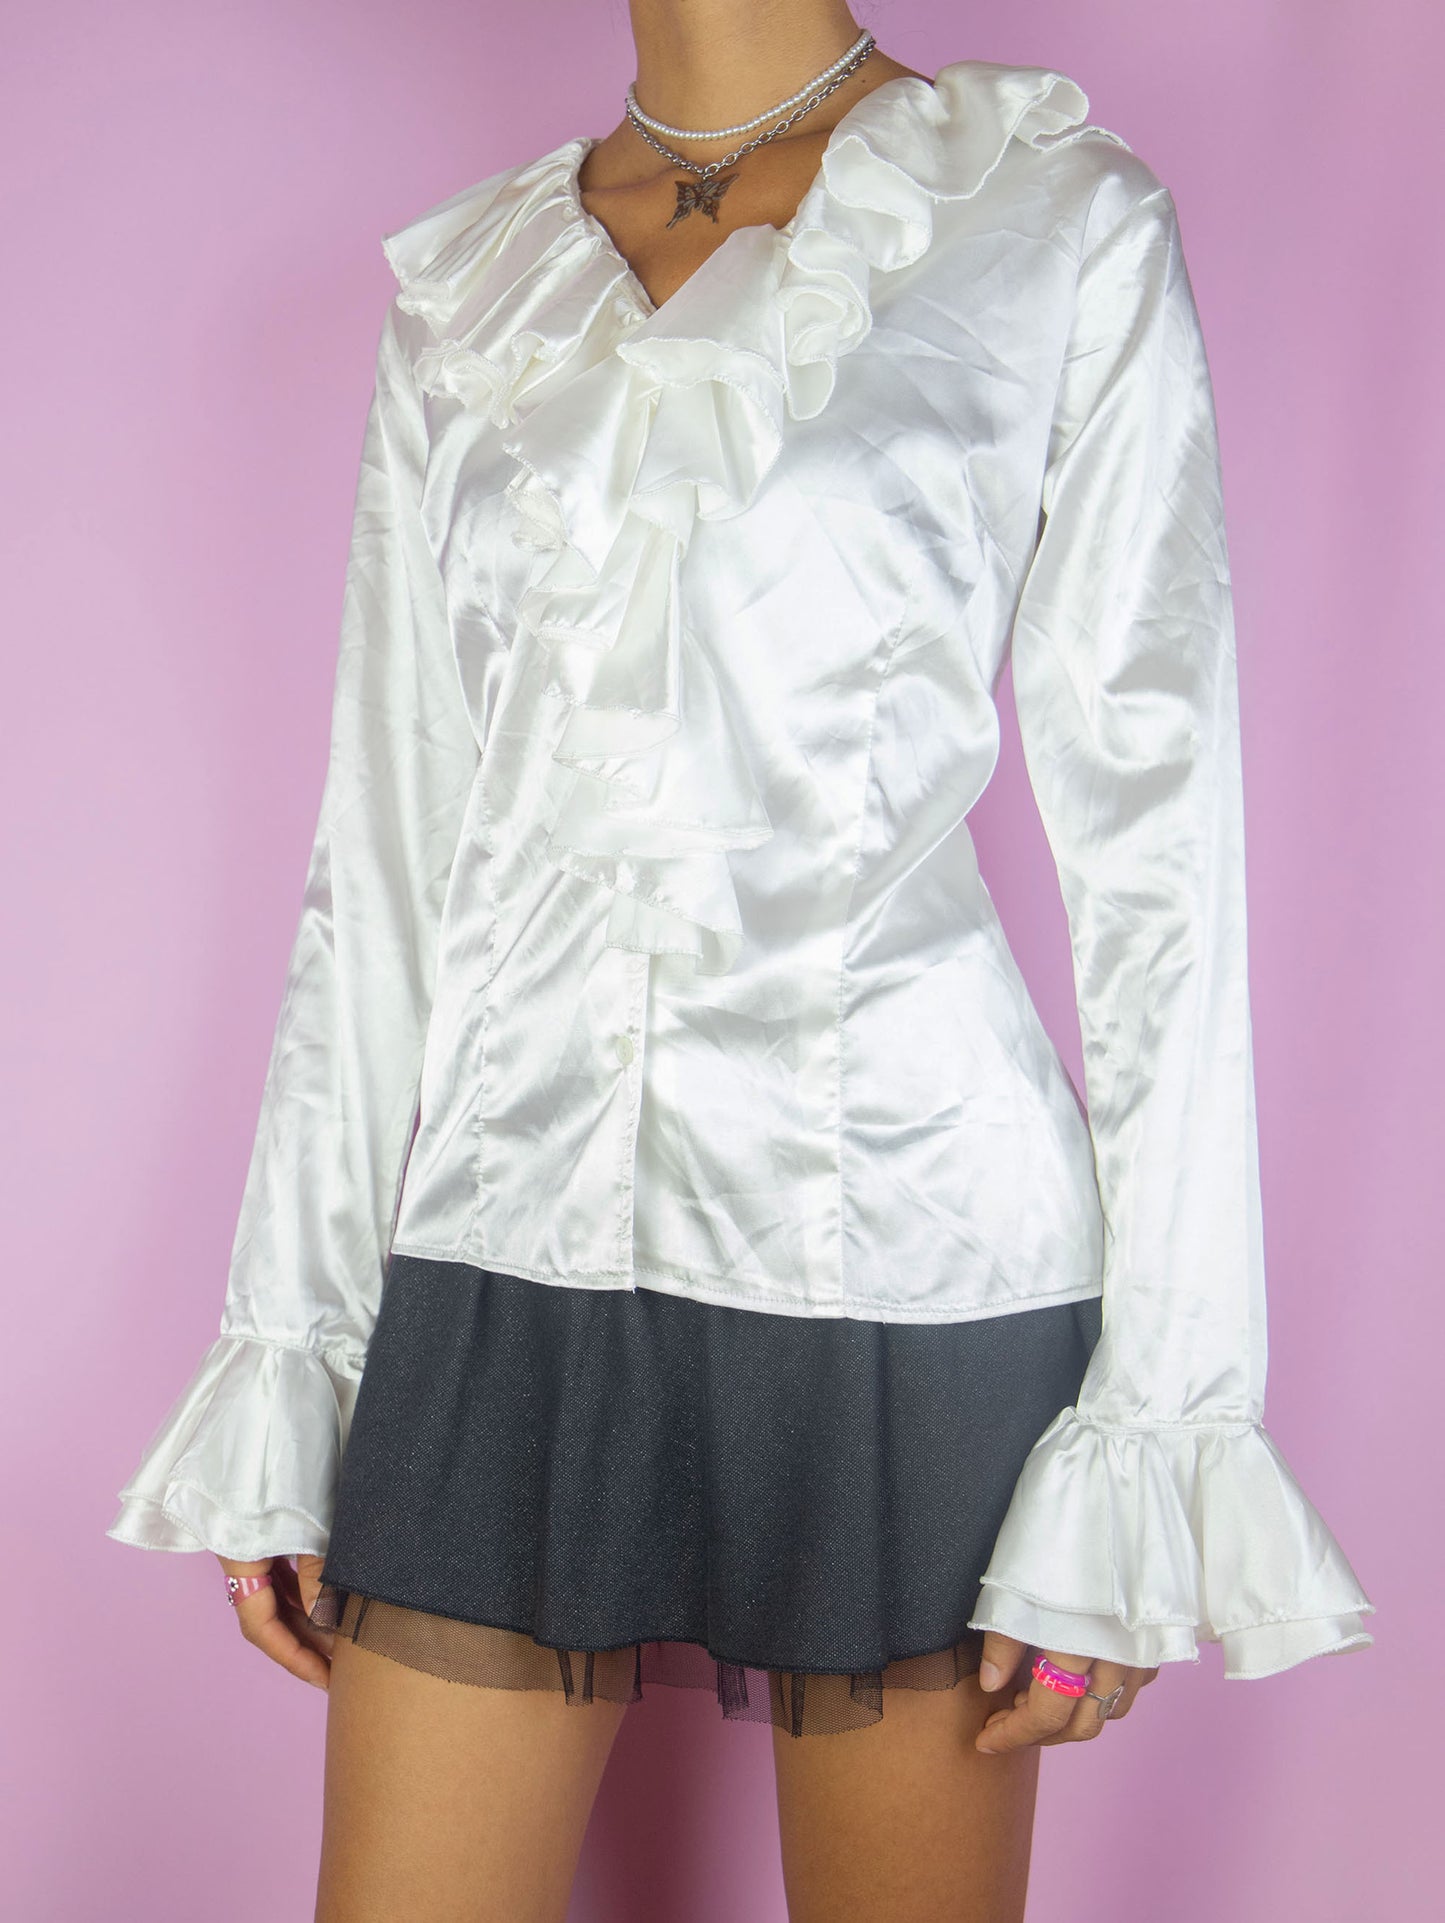 The Vintage 90s White Satin Ruffle Blouse is a shiny satin-style top with a ruffled collar, buttons, and bell sleeves. Romantic elegant 1990s evening party shirt.